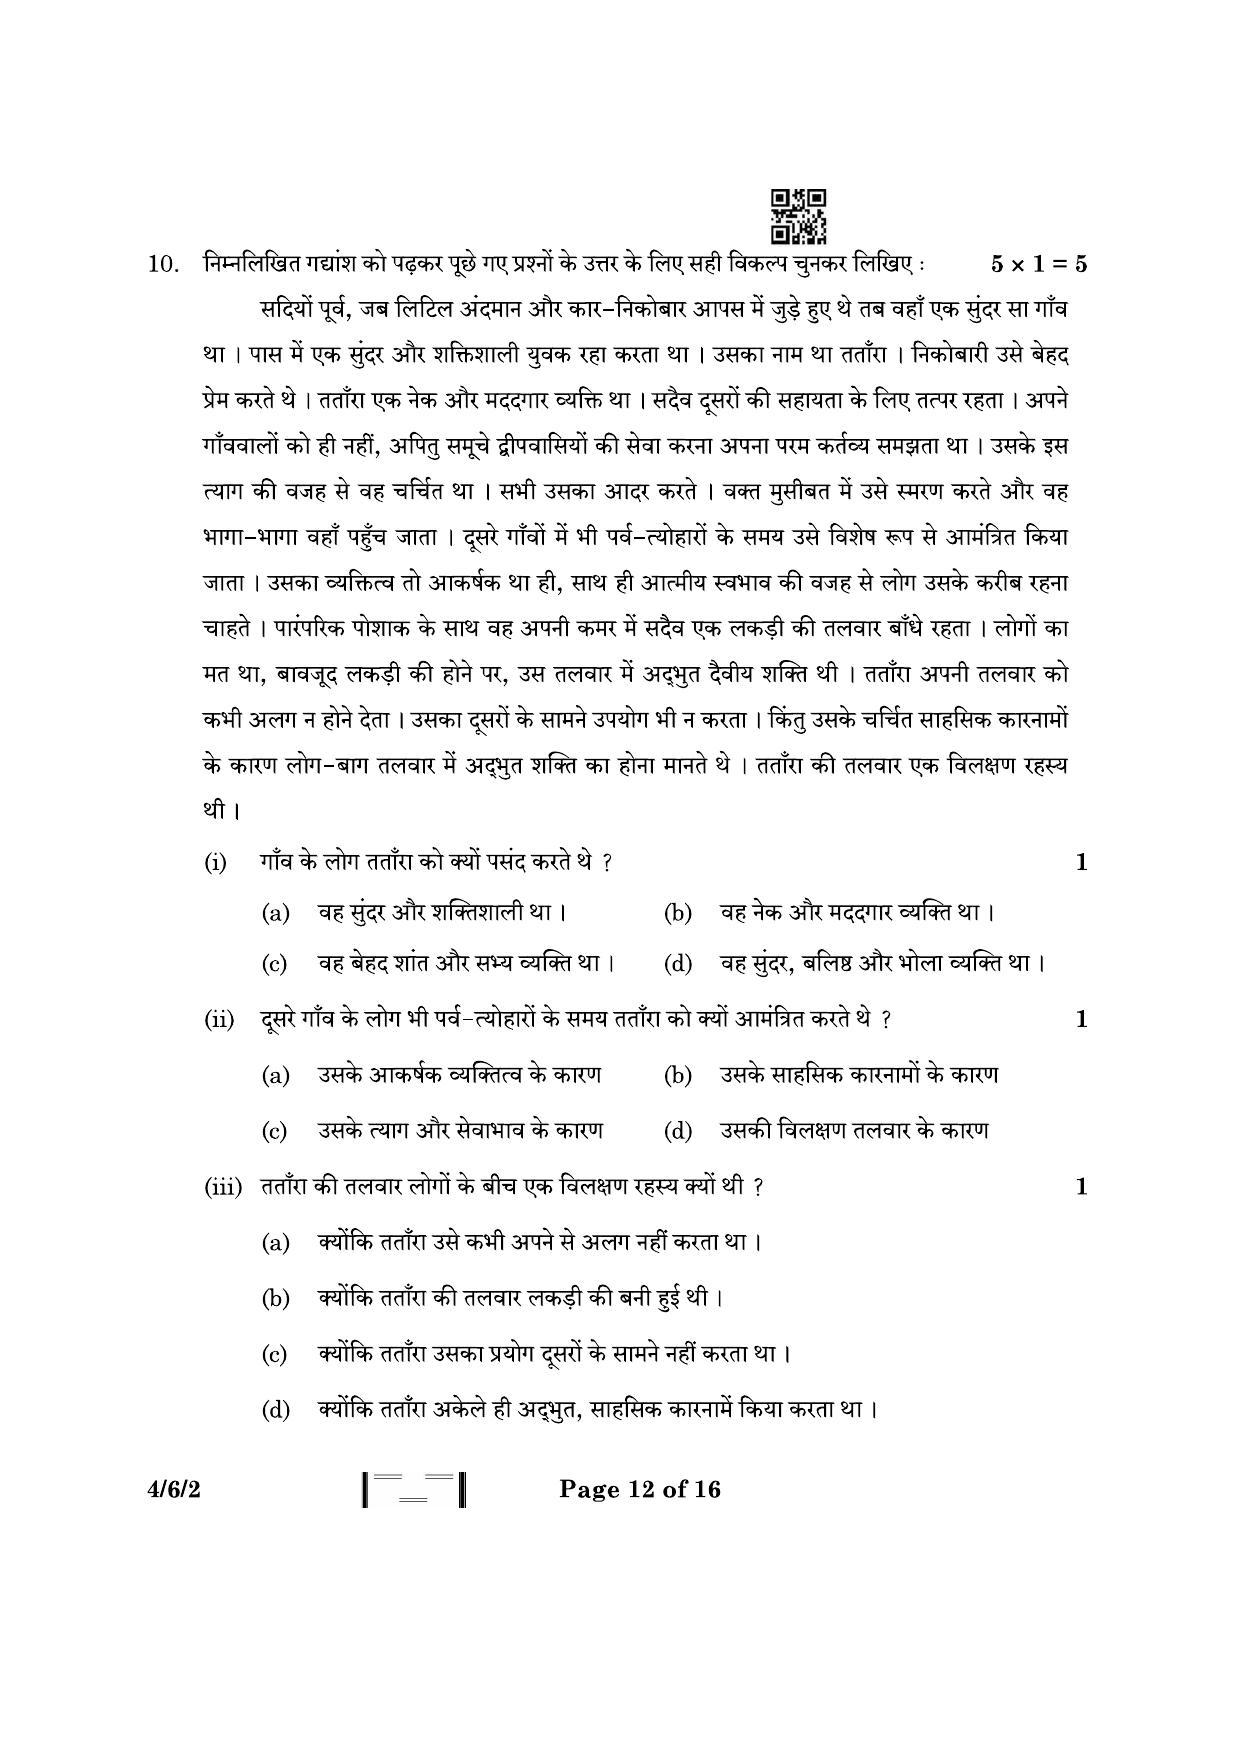 CBSE Class 10 4-6-2 Hindi B 2023 Question Paper - Page 12